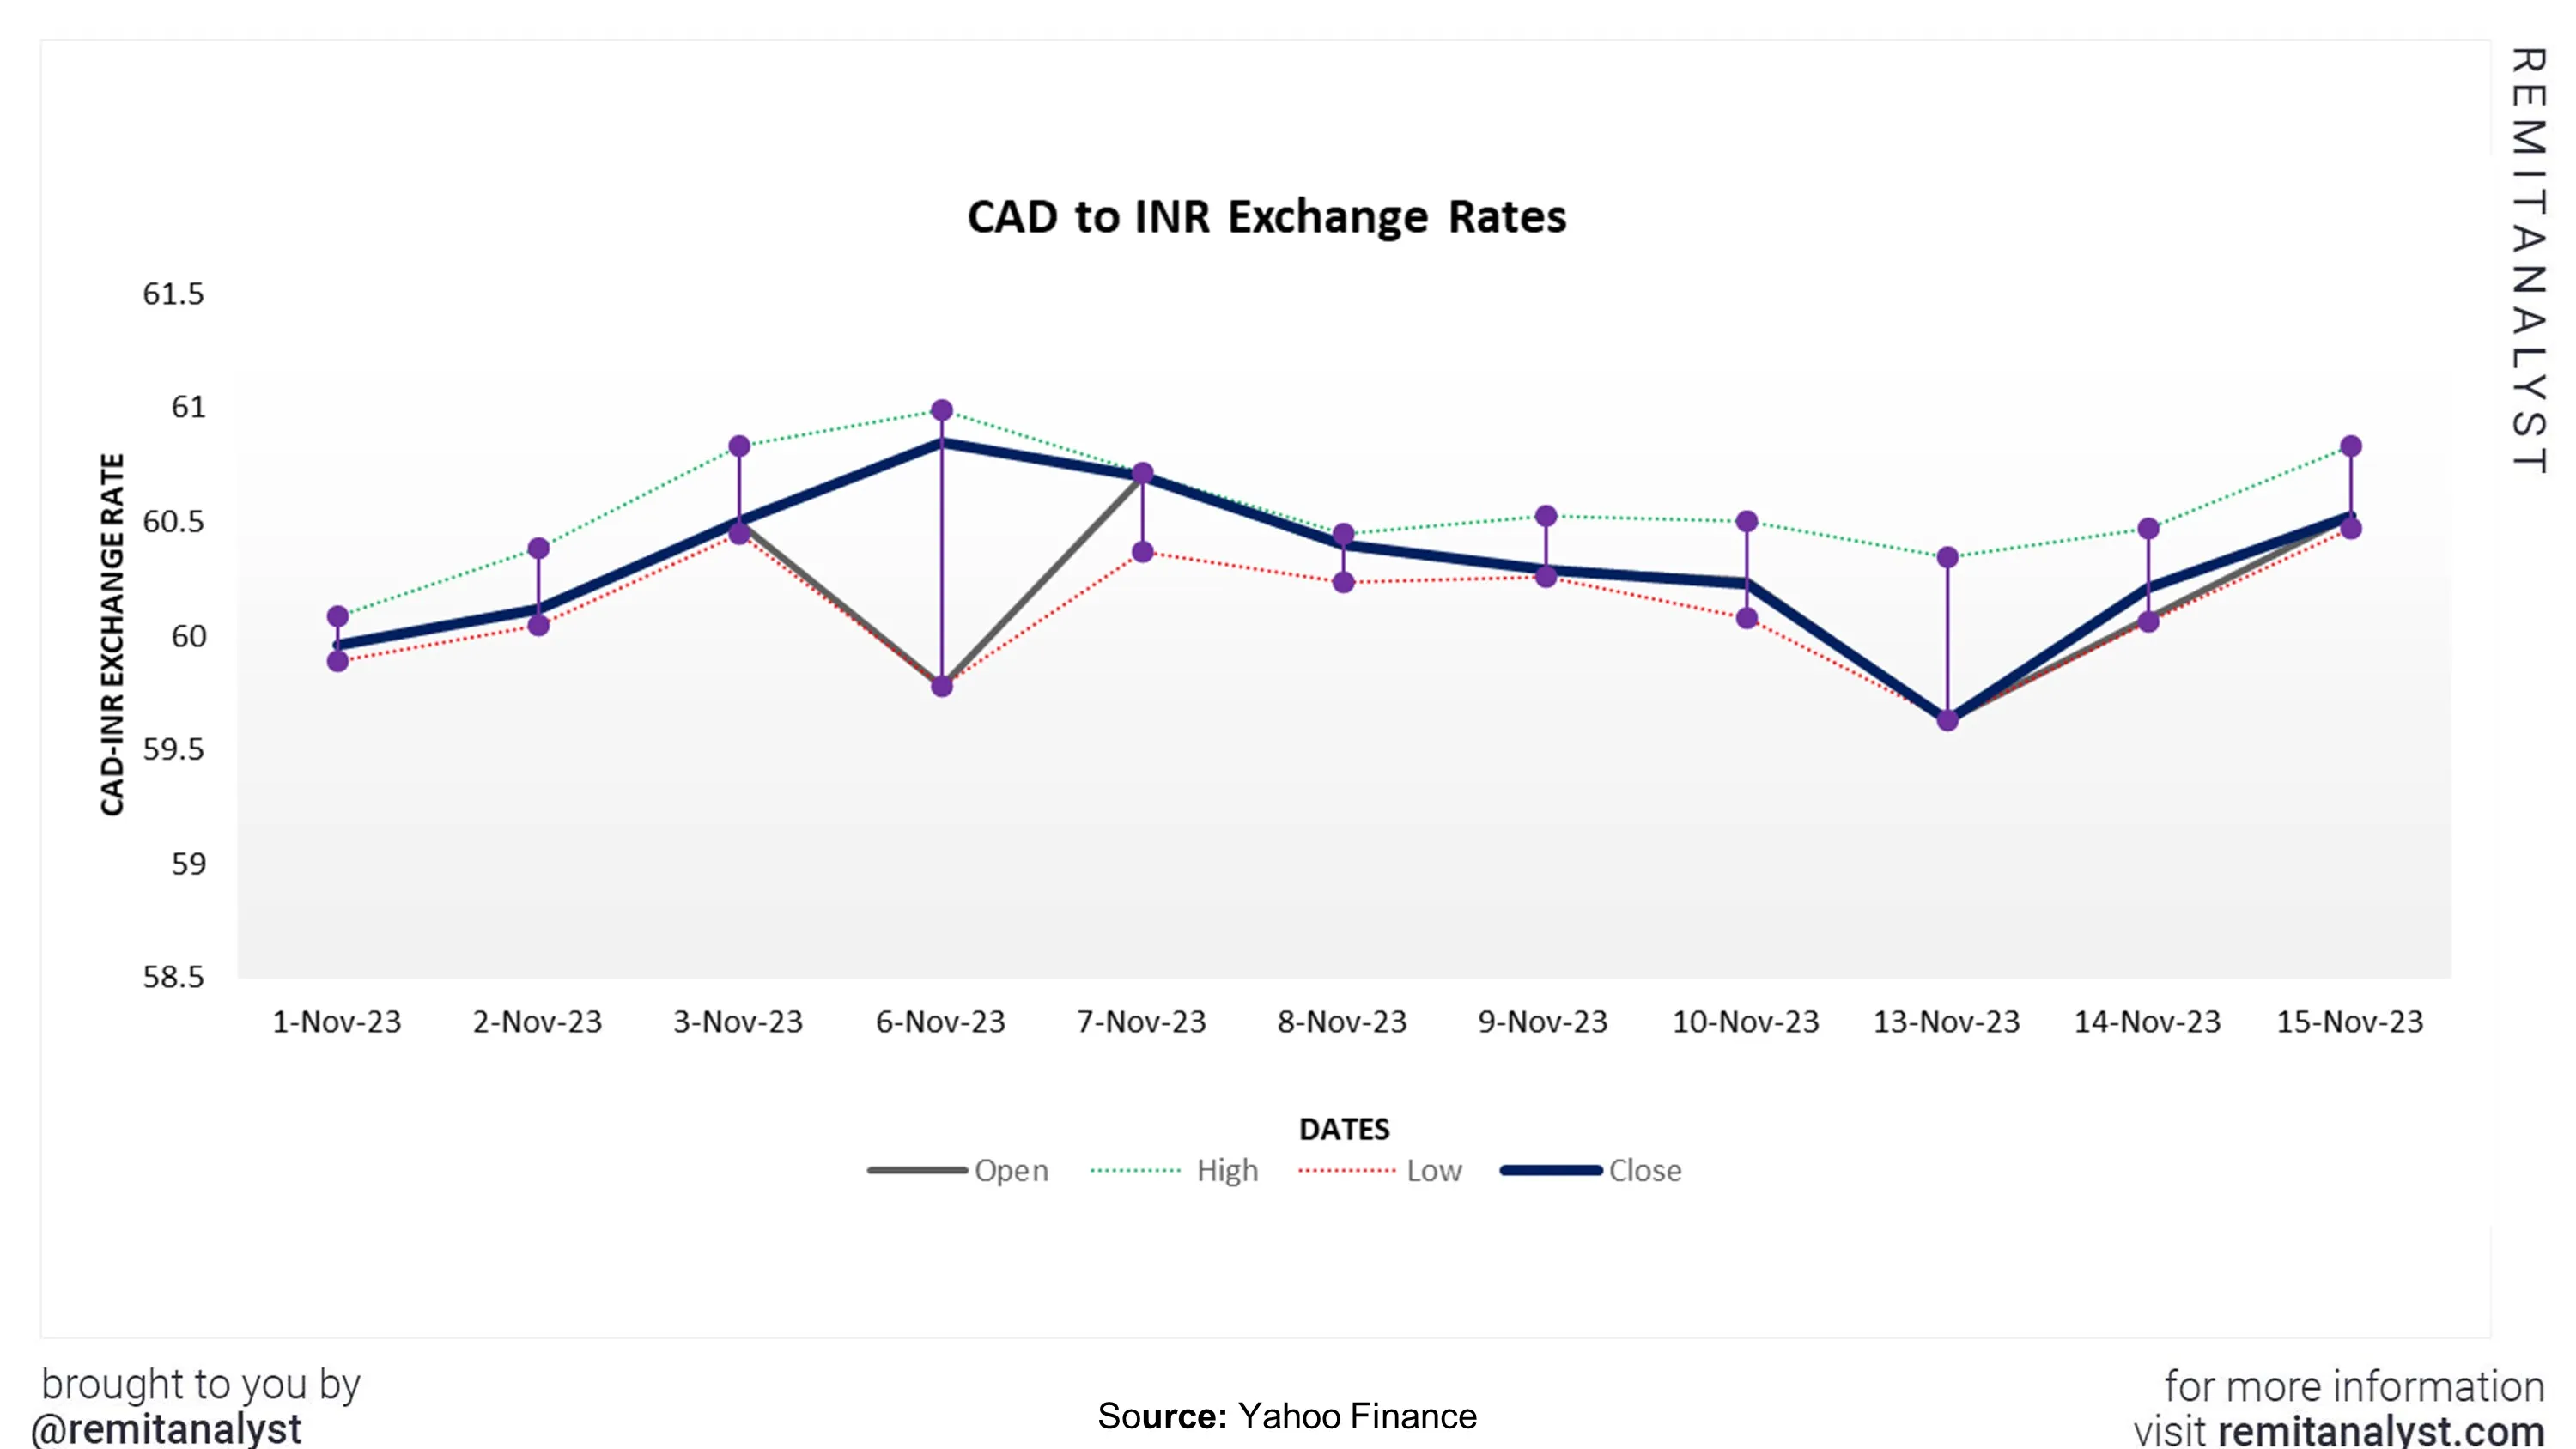 cad-to-inr-exchange-rate-from-1-nov-2023-to-15-nov-2023